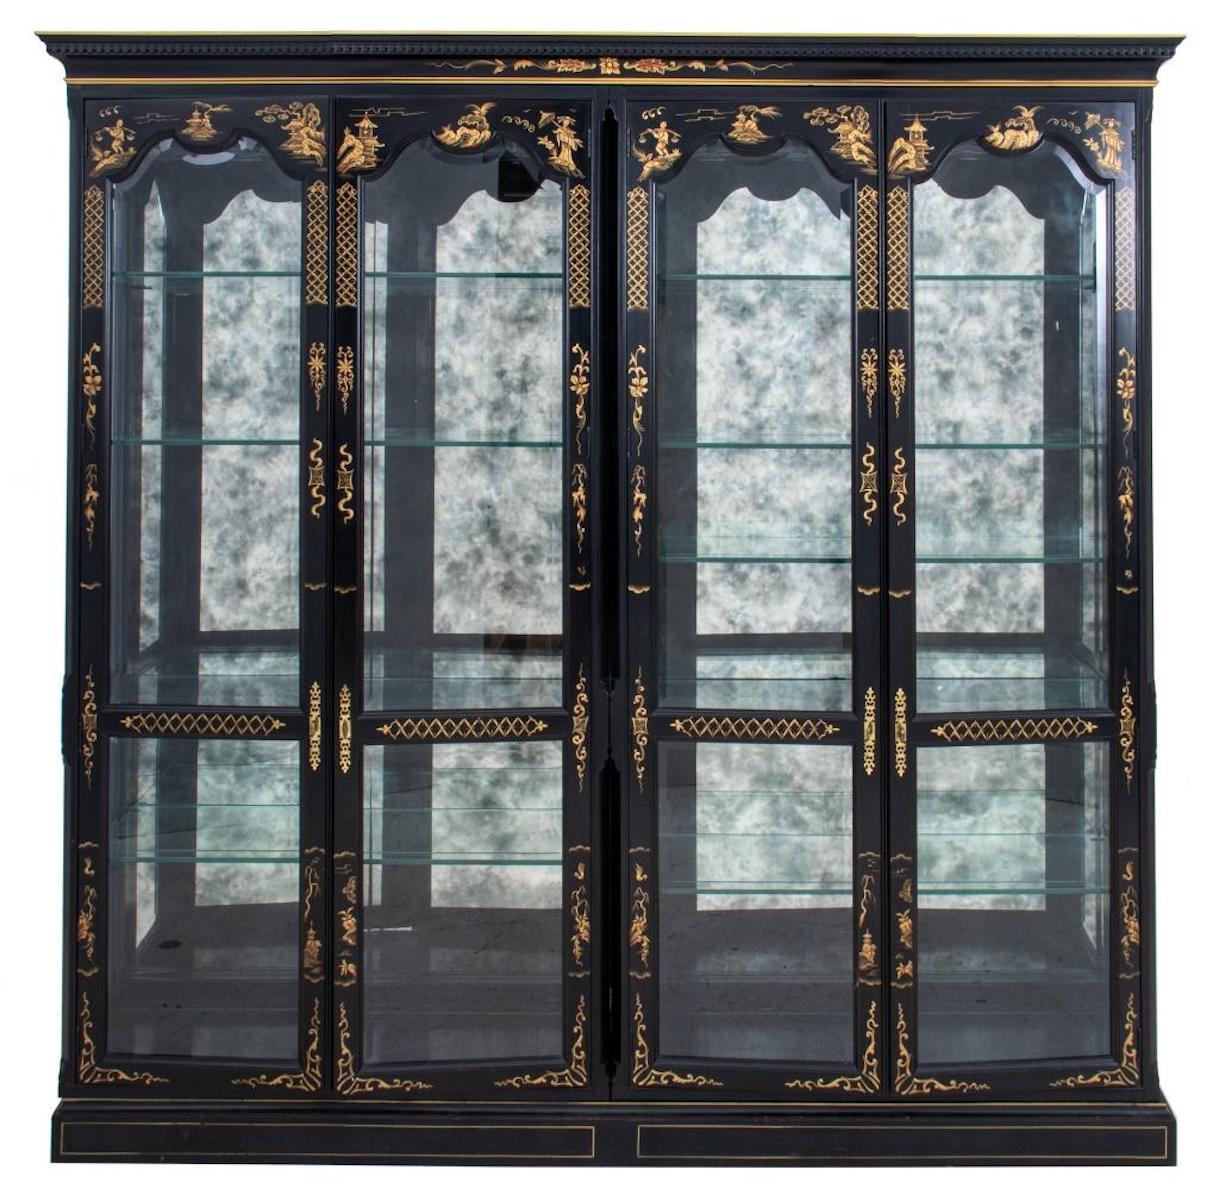 magnificently handcrafted chinoiserie cabinet of the highest quality. This was made in England & dates from the 1930’s.
This is one of the finest examples we have ever come across, it is extremely well made and is also extremely heavy! The